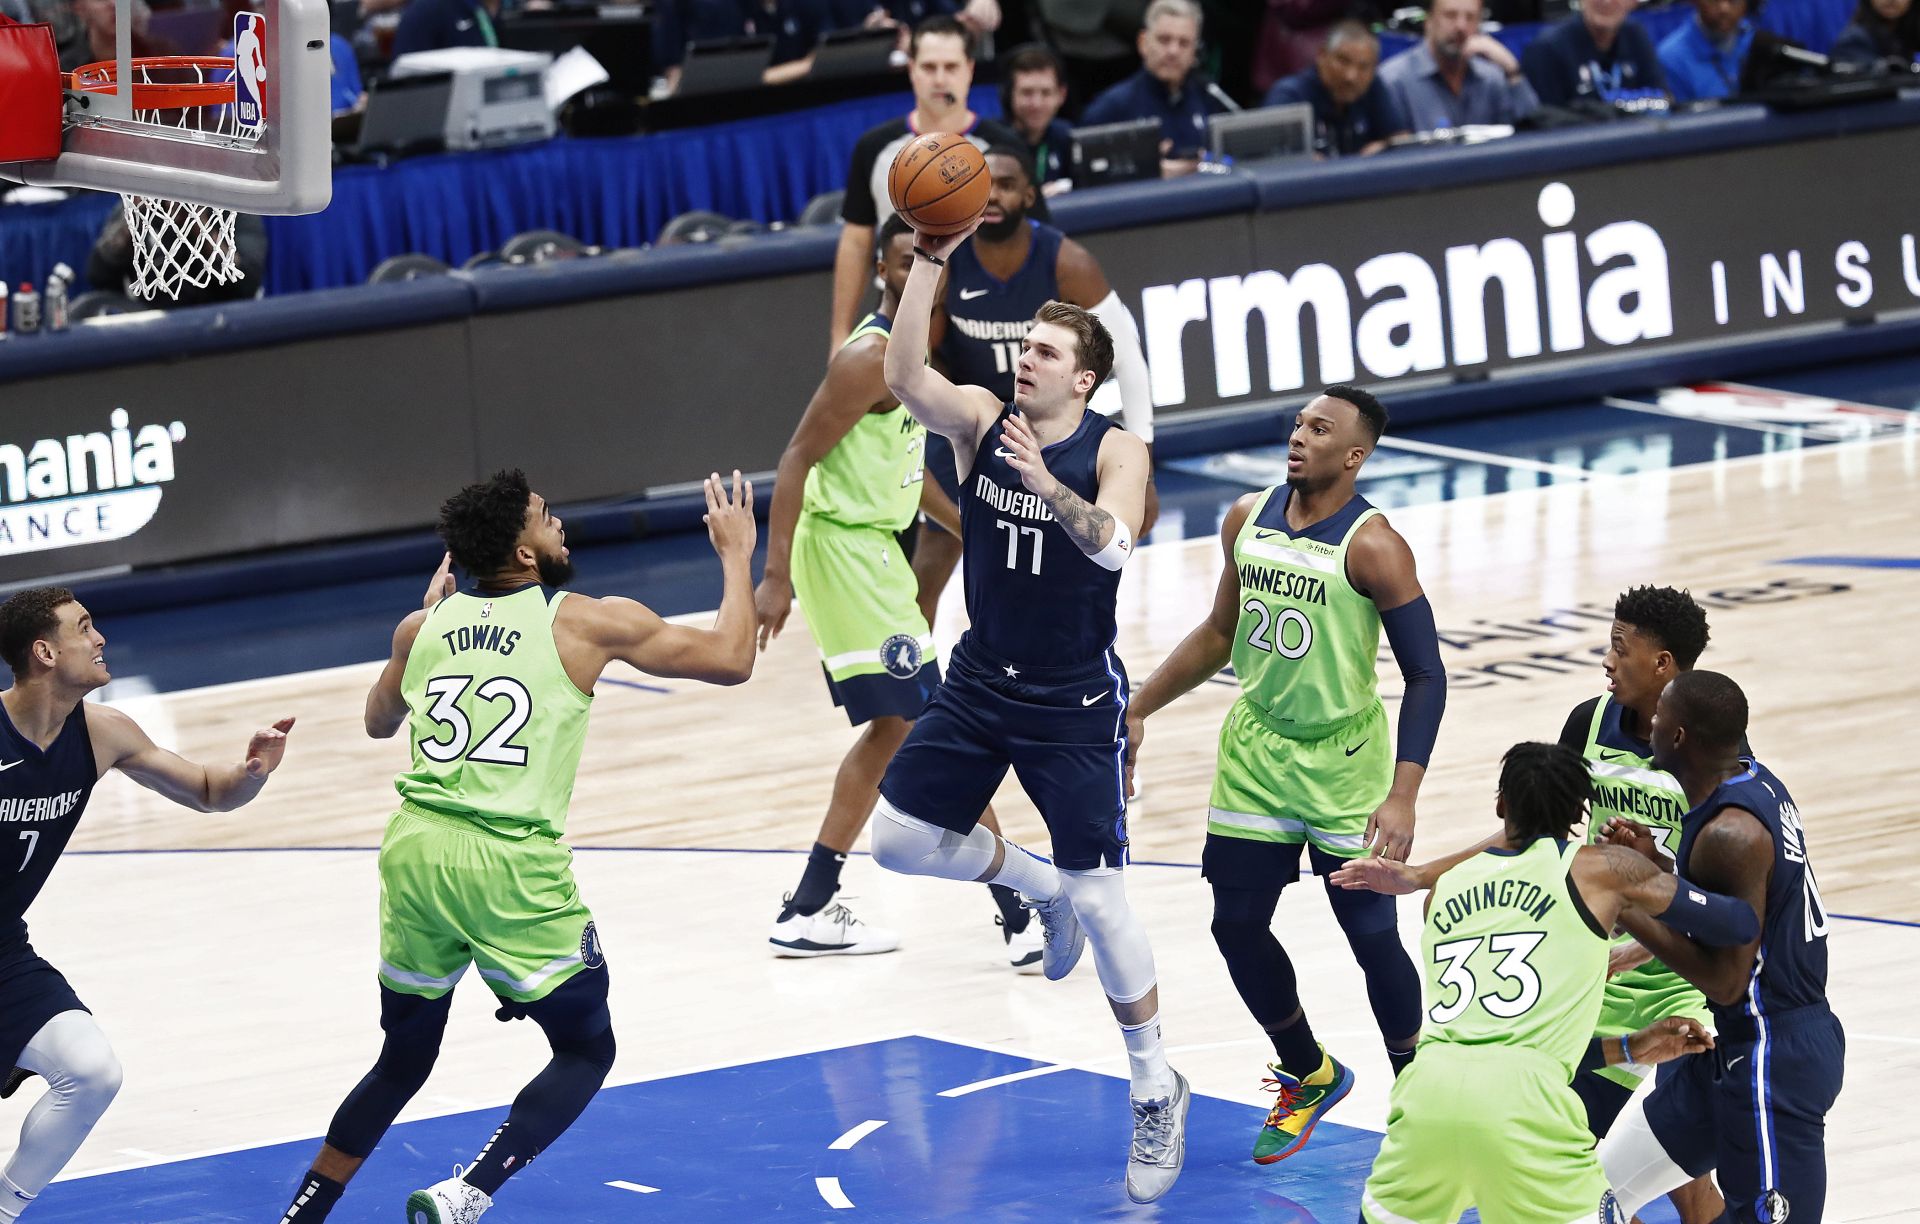 epa08045626 Minnesota Timberwolves player Karl-Anthony Towns (L) tries to block a shot against Dallas Mavericks player Luka Doncic (C) of Slovenia in the first half of their NBA basketball game at the American Airlines Center in Dallas, Texas, USA, 04 December 2019.  EPA/LARRY W. SMITH  SHUTTERSTOCK OUT